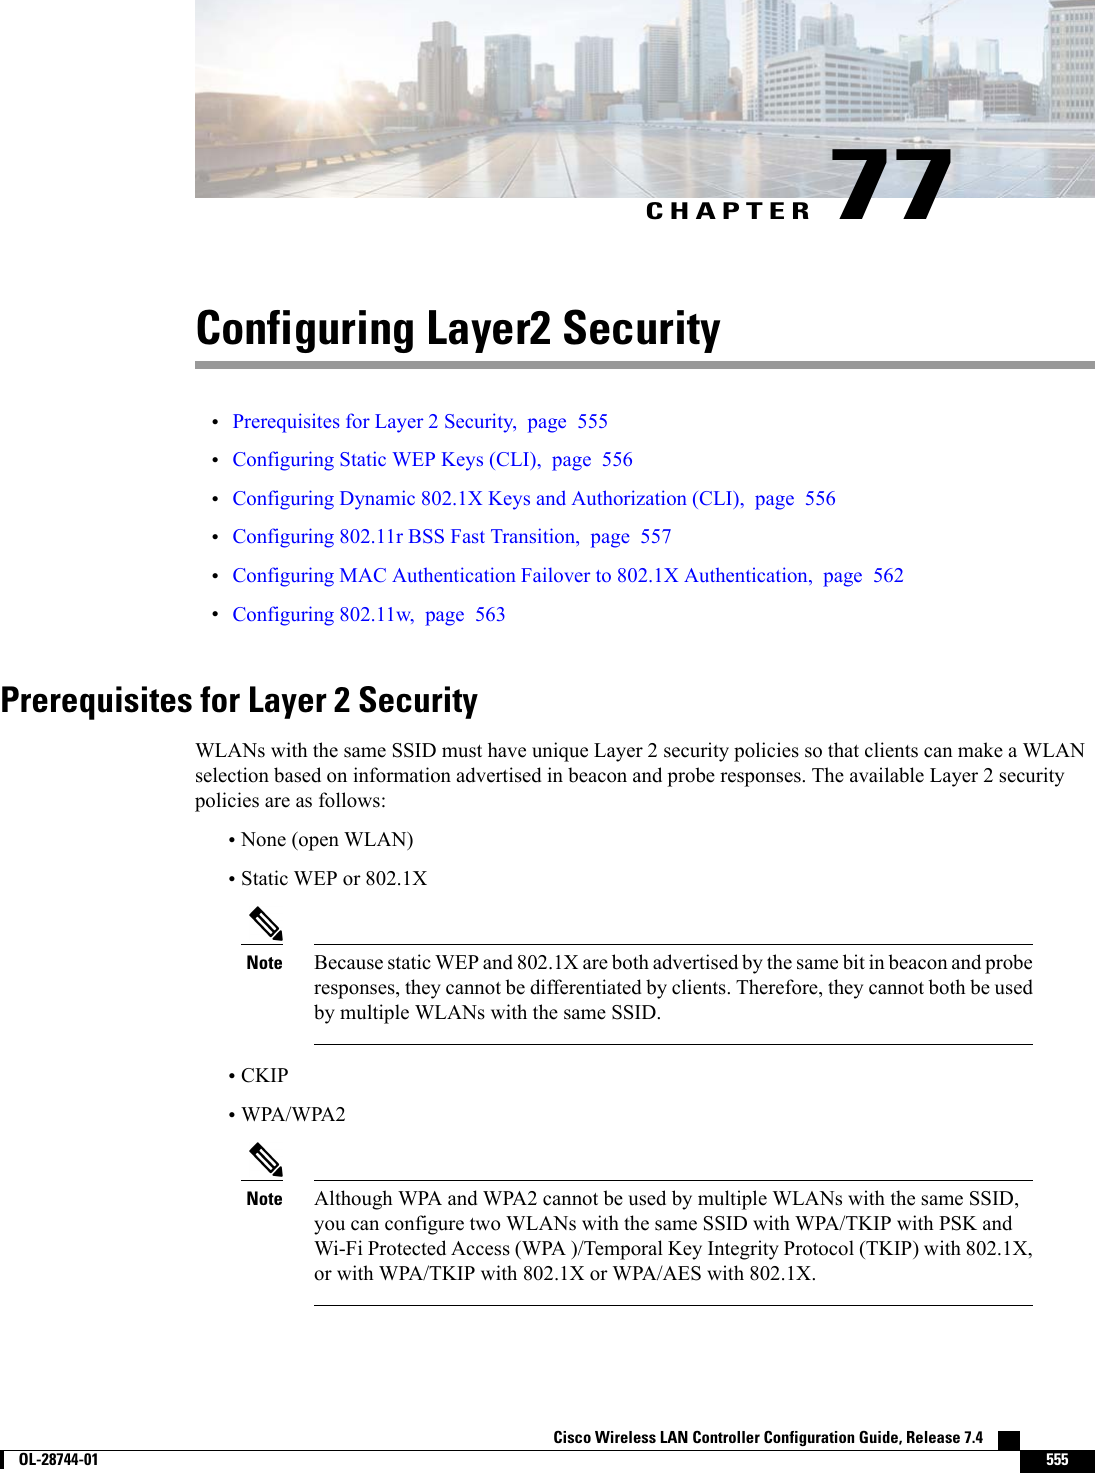 CHAPTER 77Configuring Layer2 Security•Prerequisites for Layer 2 Security, page 555•Configuring Static WEP Keys (CLI), page 556•Configuring Dynamic 802.1X Keys and Authorization (CLI), page 556•Configuring 802.11r BSS Fast Transition, page 557•Configuring MAC Authentication Failover to 802.1X Authentication, page 562•Configuring 802.11w, page 563Prerequisites for Layer 2 SecurityWLANs with the same SSID must have unique Layer 2 security policies so that clients can make a WLANselection based on information advertised in beacon and probe responses. The available Layer 2 securitypolicies are as follows:•None (open WLAN)•Static WEP or 802.1XBecause static WEP and 802.1X are both advertised by the same bit in beacon and proberesponses, they cannot be differentiated by clients. Therefore, they cannot both be usedby multiple WLANs with the same SSID.Note•CKIP•WPA/WPA2Although WPA and WPA2 cannot be used by multiple WLANs with the same SSID,you can configure two WLANs with the same SSID with WPA/TKIP with PSK andWi-Fi Protected Access (WPA )/Temporal Key Integrity Protocol (TKIP) with 802.1X,or with WPA/TKIP with 802.1X or WPA/AES with 802.1X.NoteCisco Wireless LAN Controller Configuration Guide, Release 7.4        OL-28744-01 555